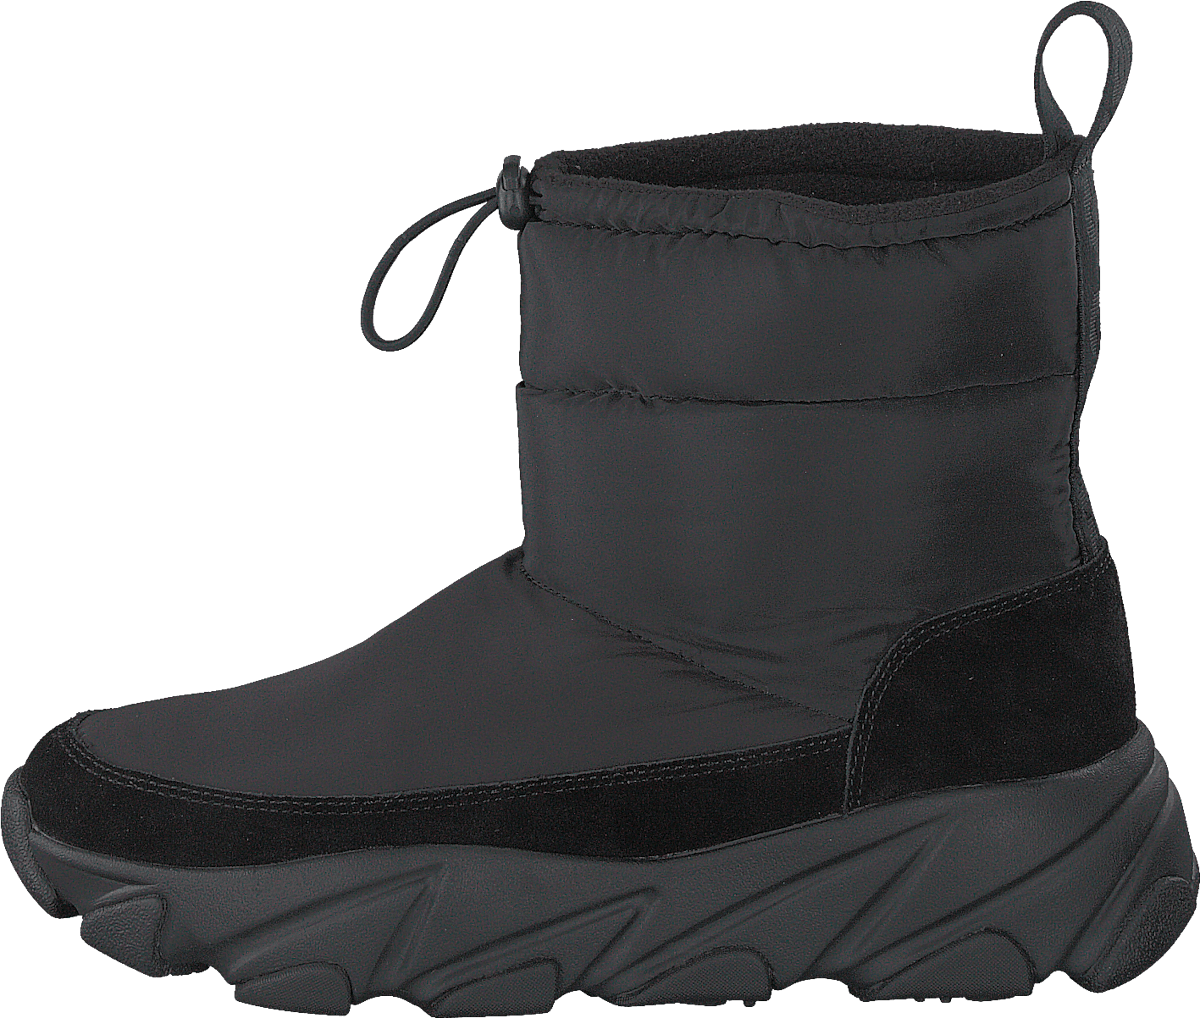 Low Winter Boots Black